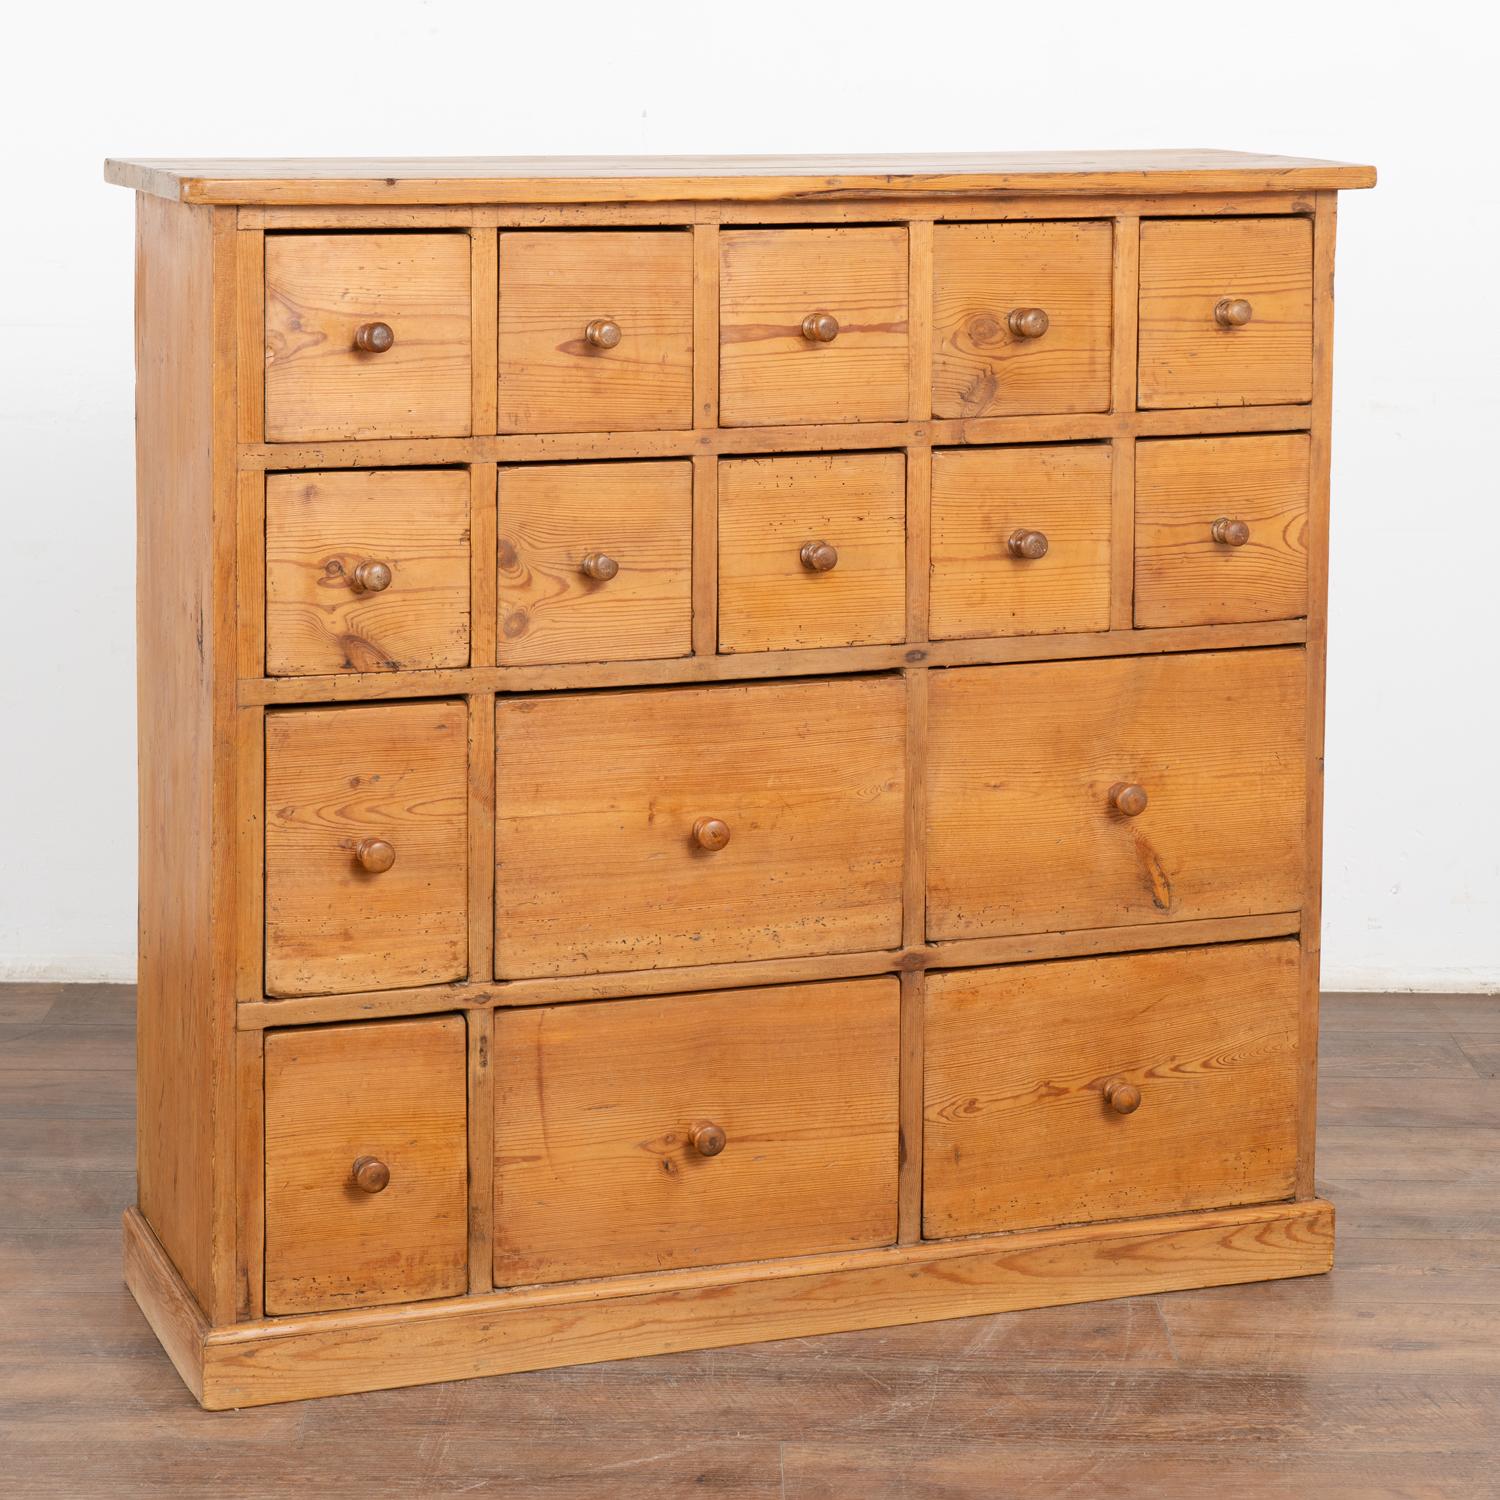 This pine apothecary is both a fun and functional chest of various sized drawers. At only 14